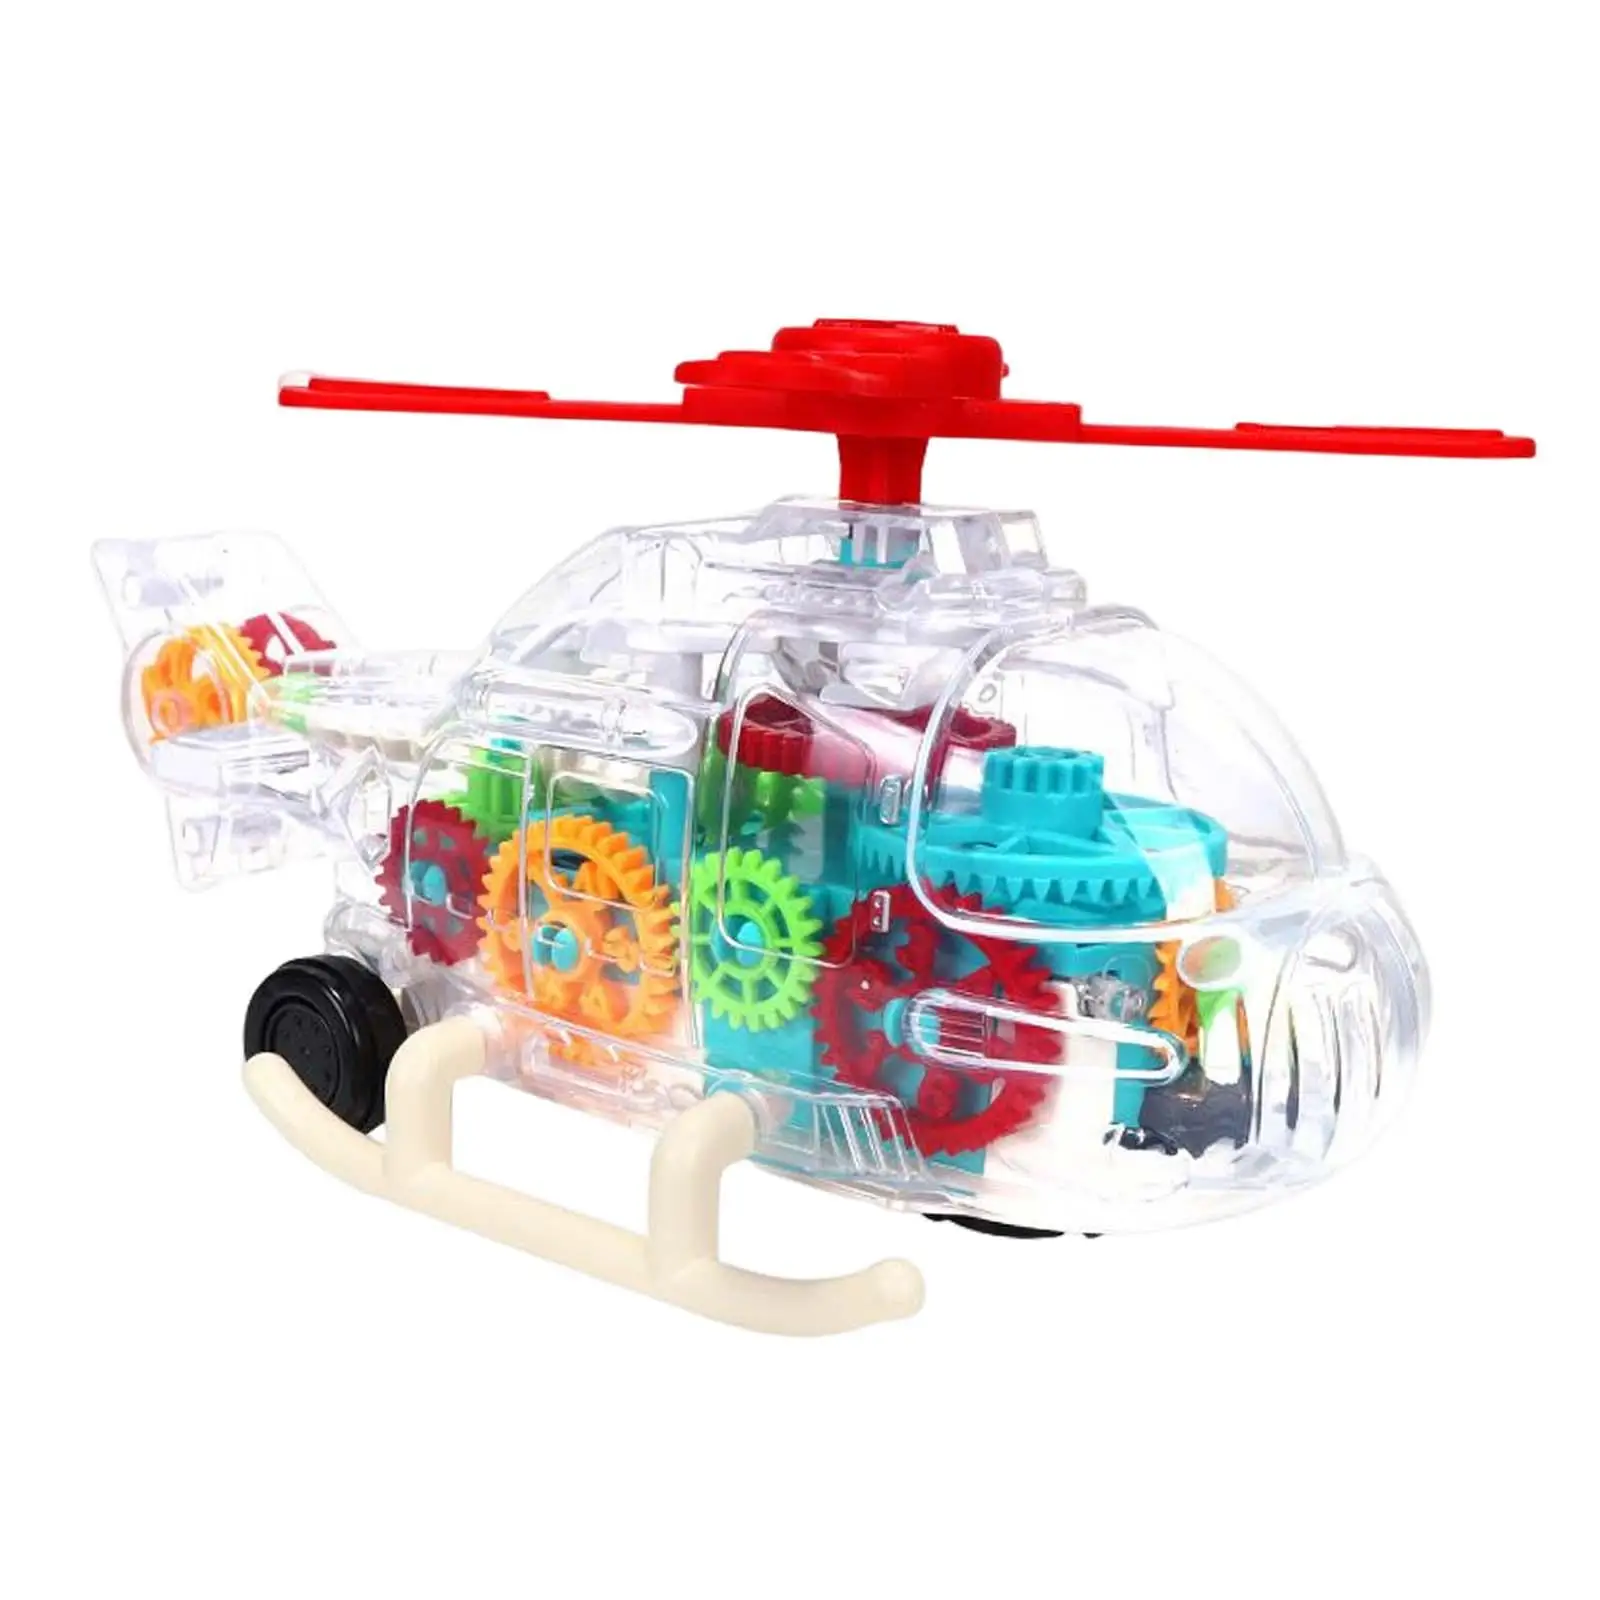 Mechanical Gear Helicopter Toy with Lights with Moving Gears Interactive Toys for Children Kids Toddlers Girls Birthday Gifts